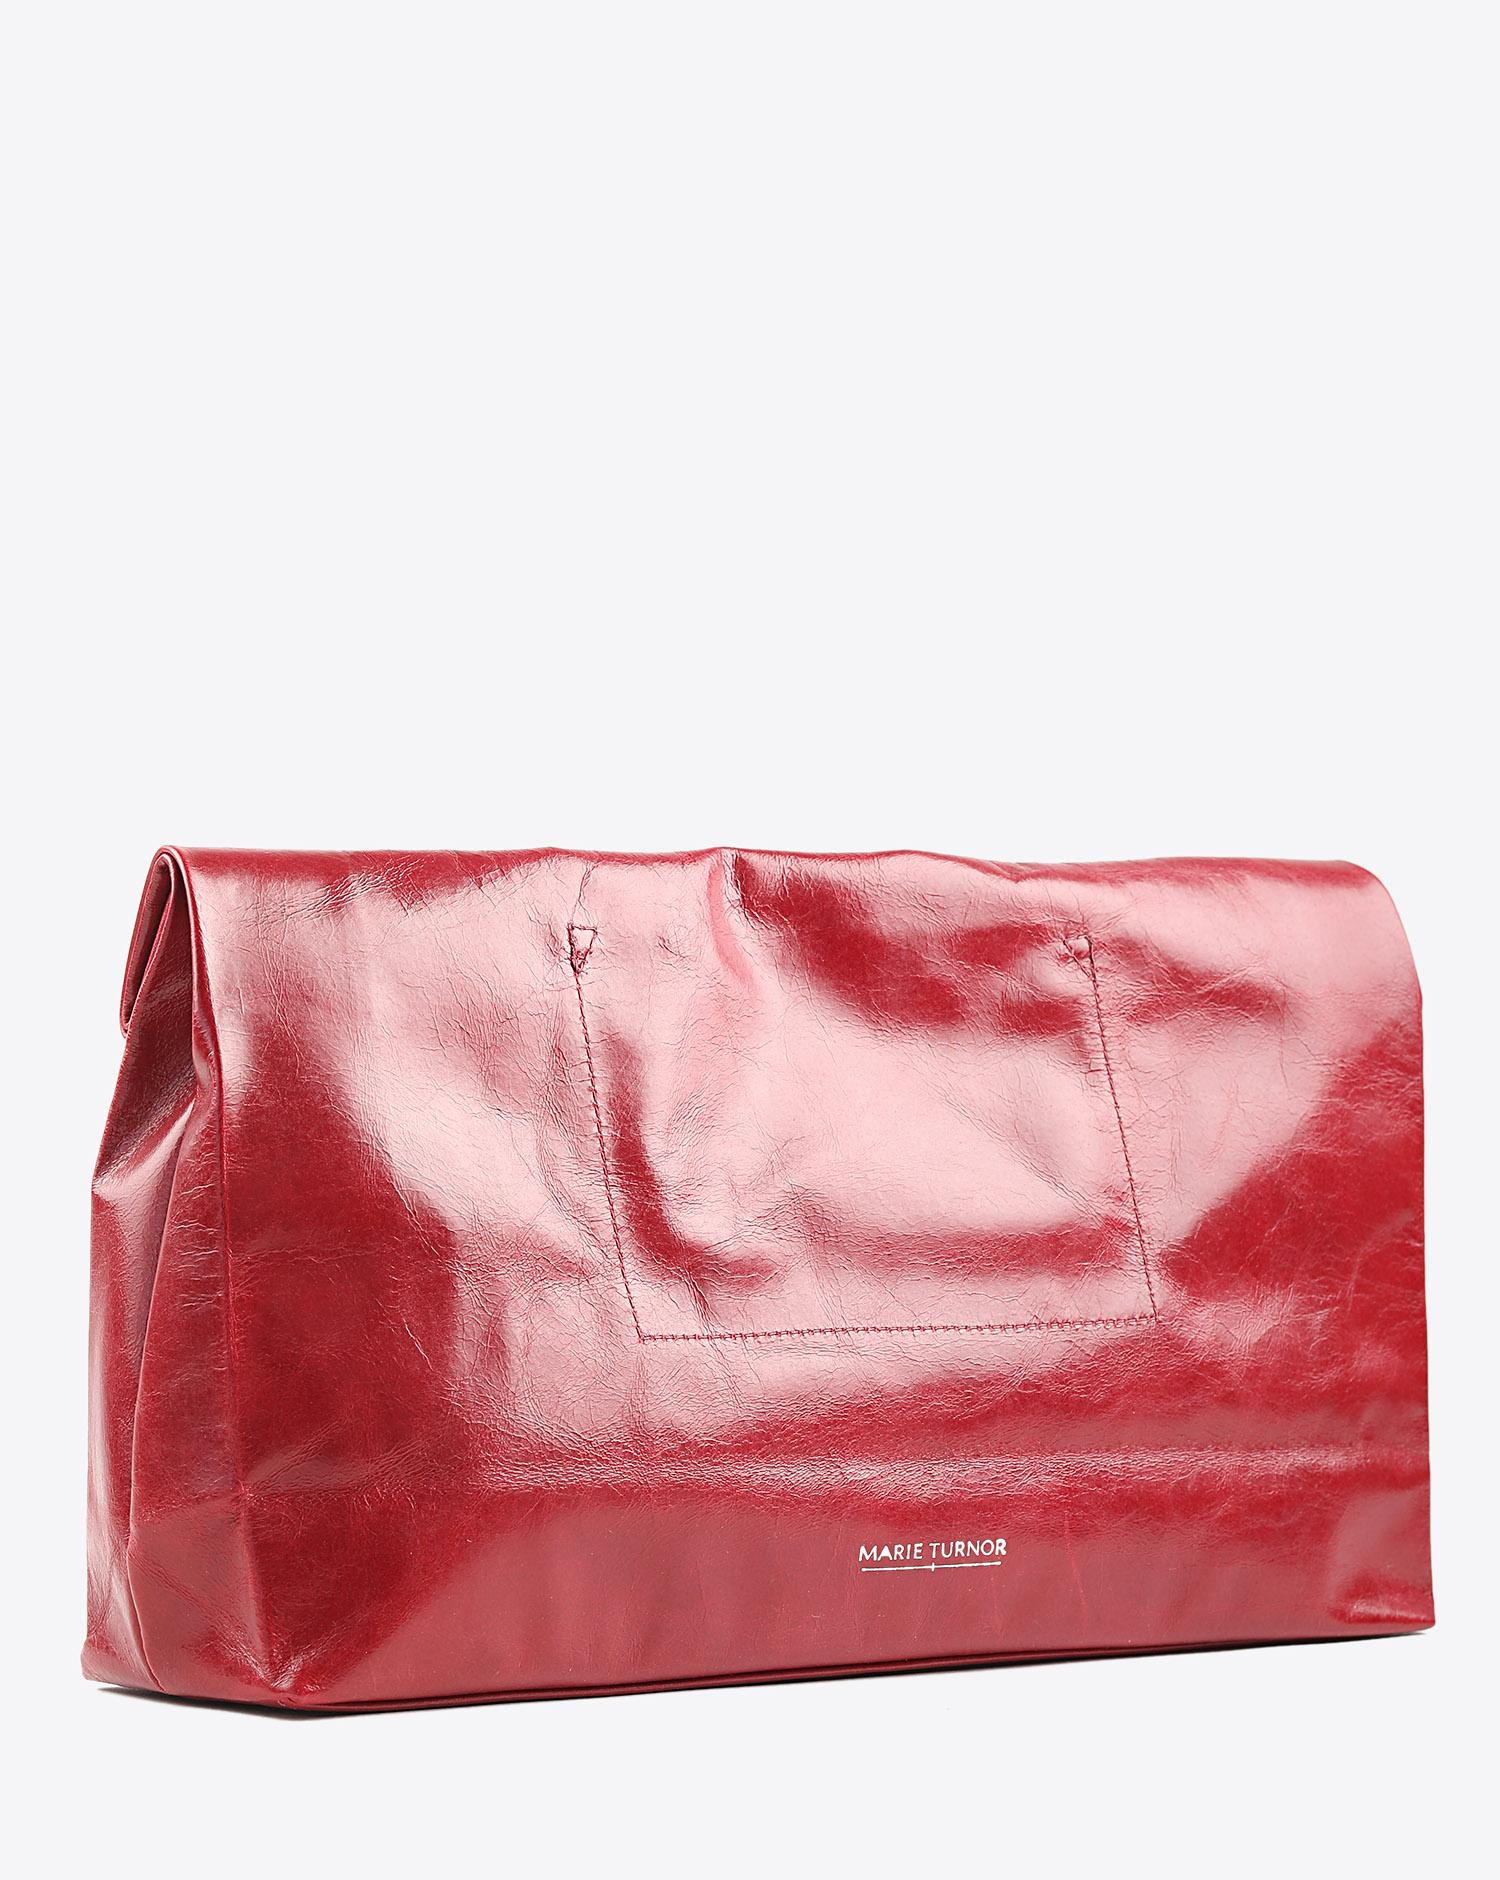 Marie Turnor Dinner Clutch - Red  